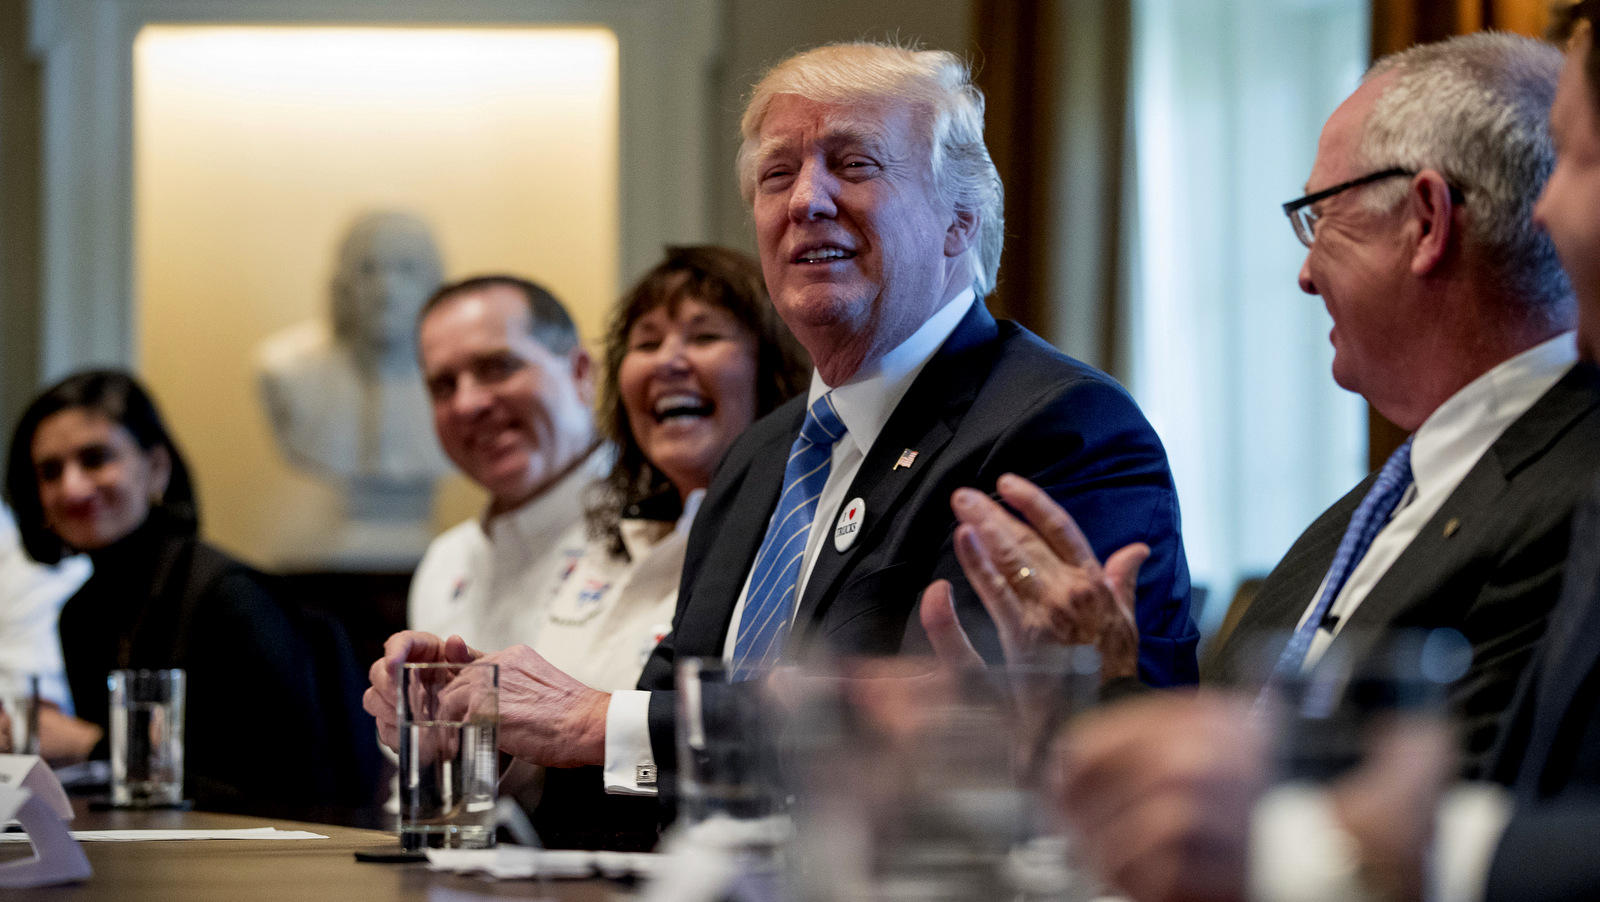 President Donald Trump meets with CEOs of the trucking industry in the Cabinet Room of the White House, March 23, 2017. (AP/Andrew Harnik)